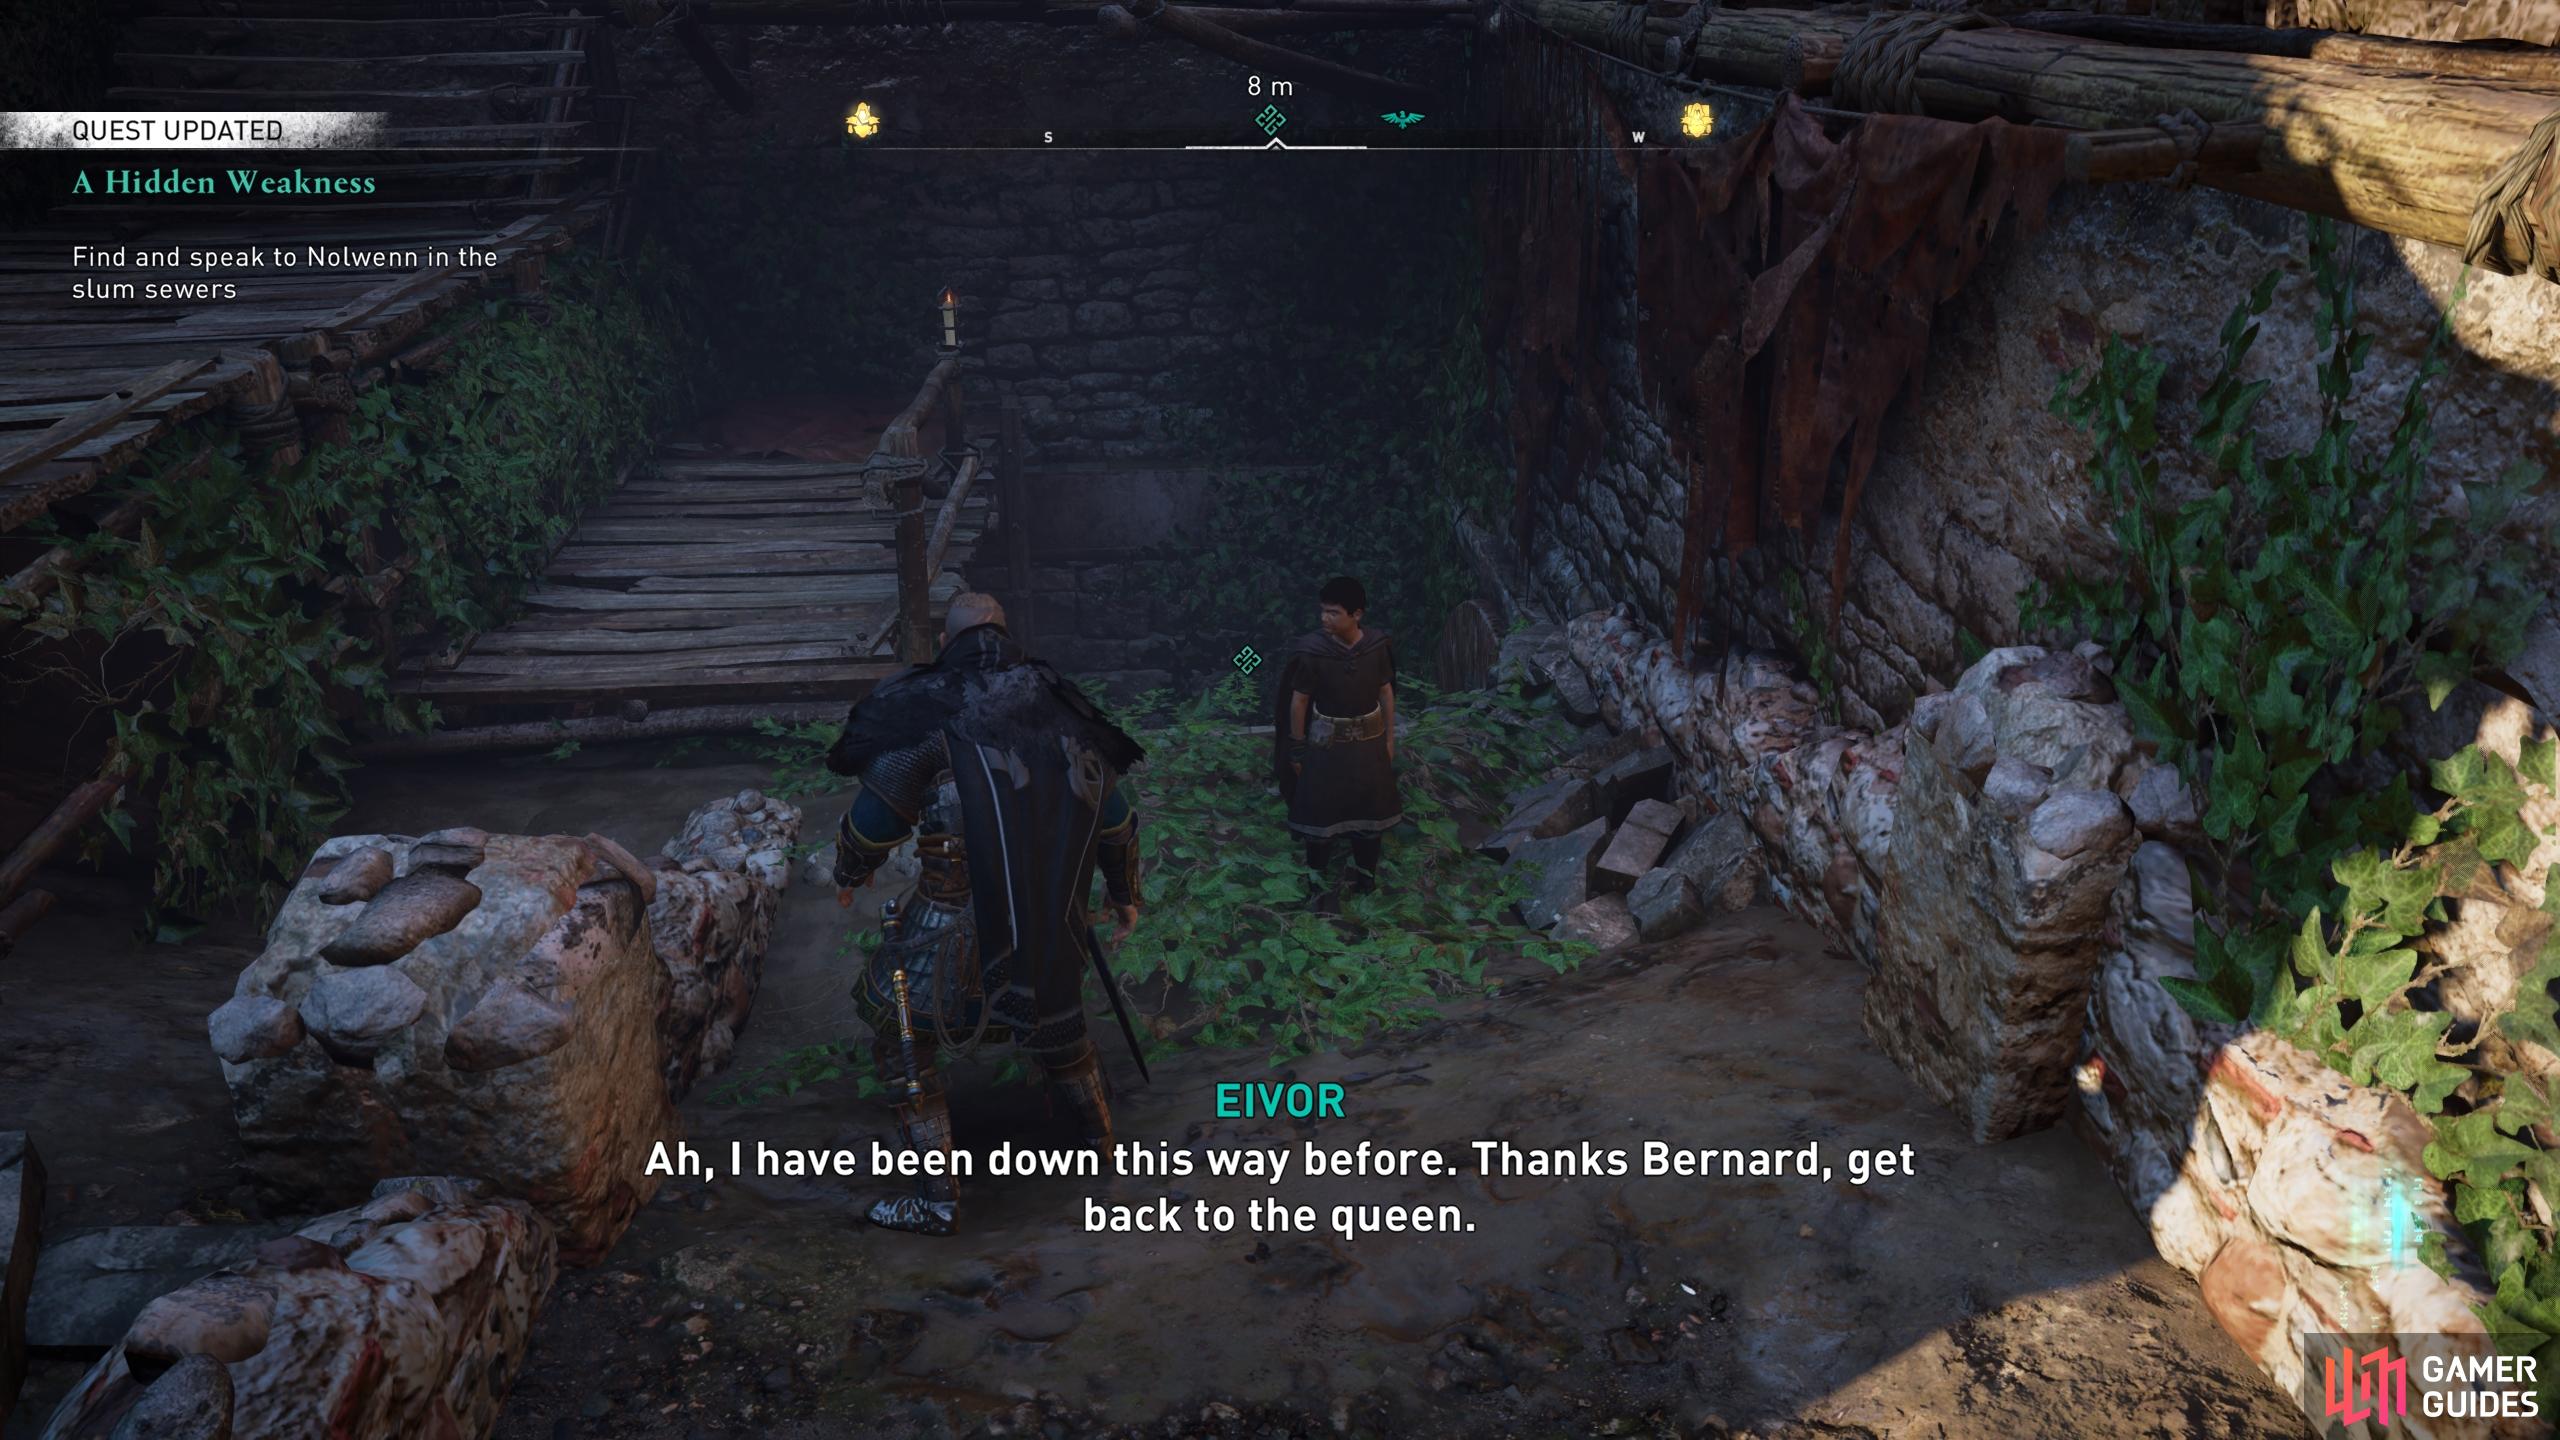 Follow Bernard to the entrance to the sewer network.